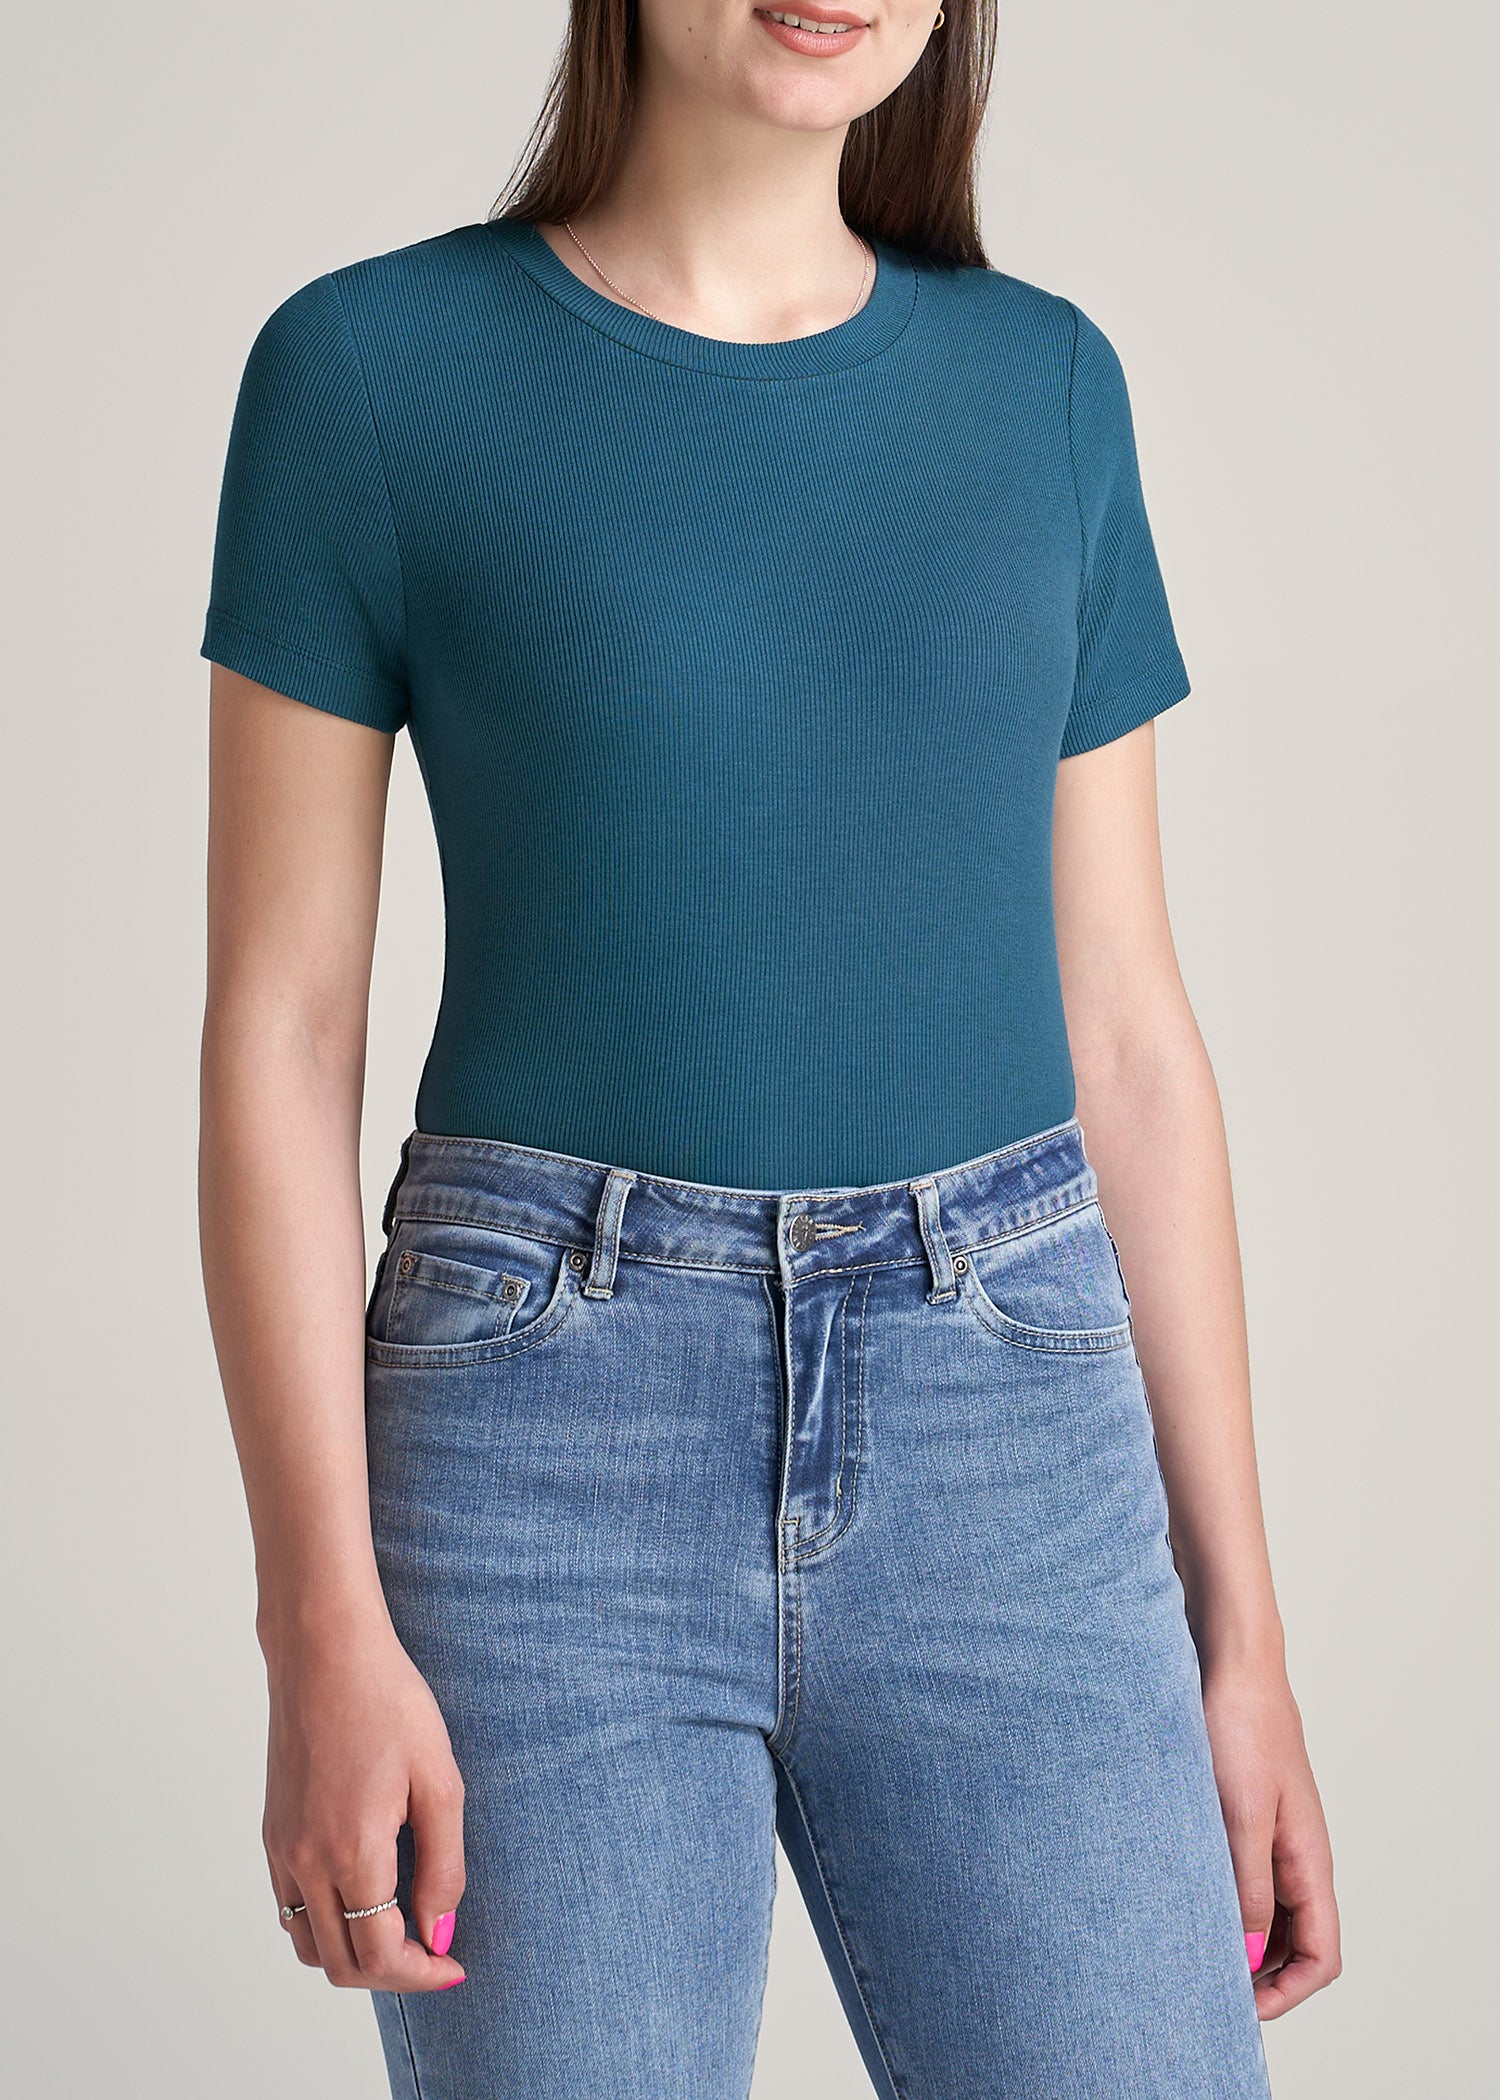 American-Tall-Women-Ribbed-Tee-DeepWater-front